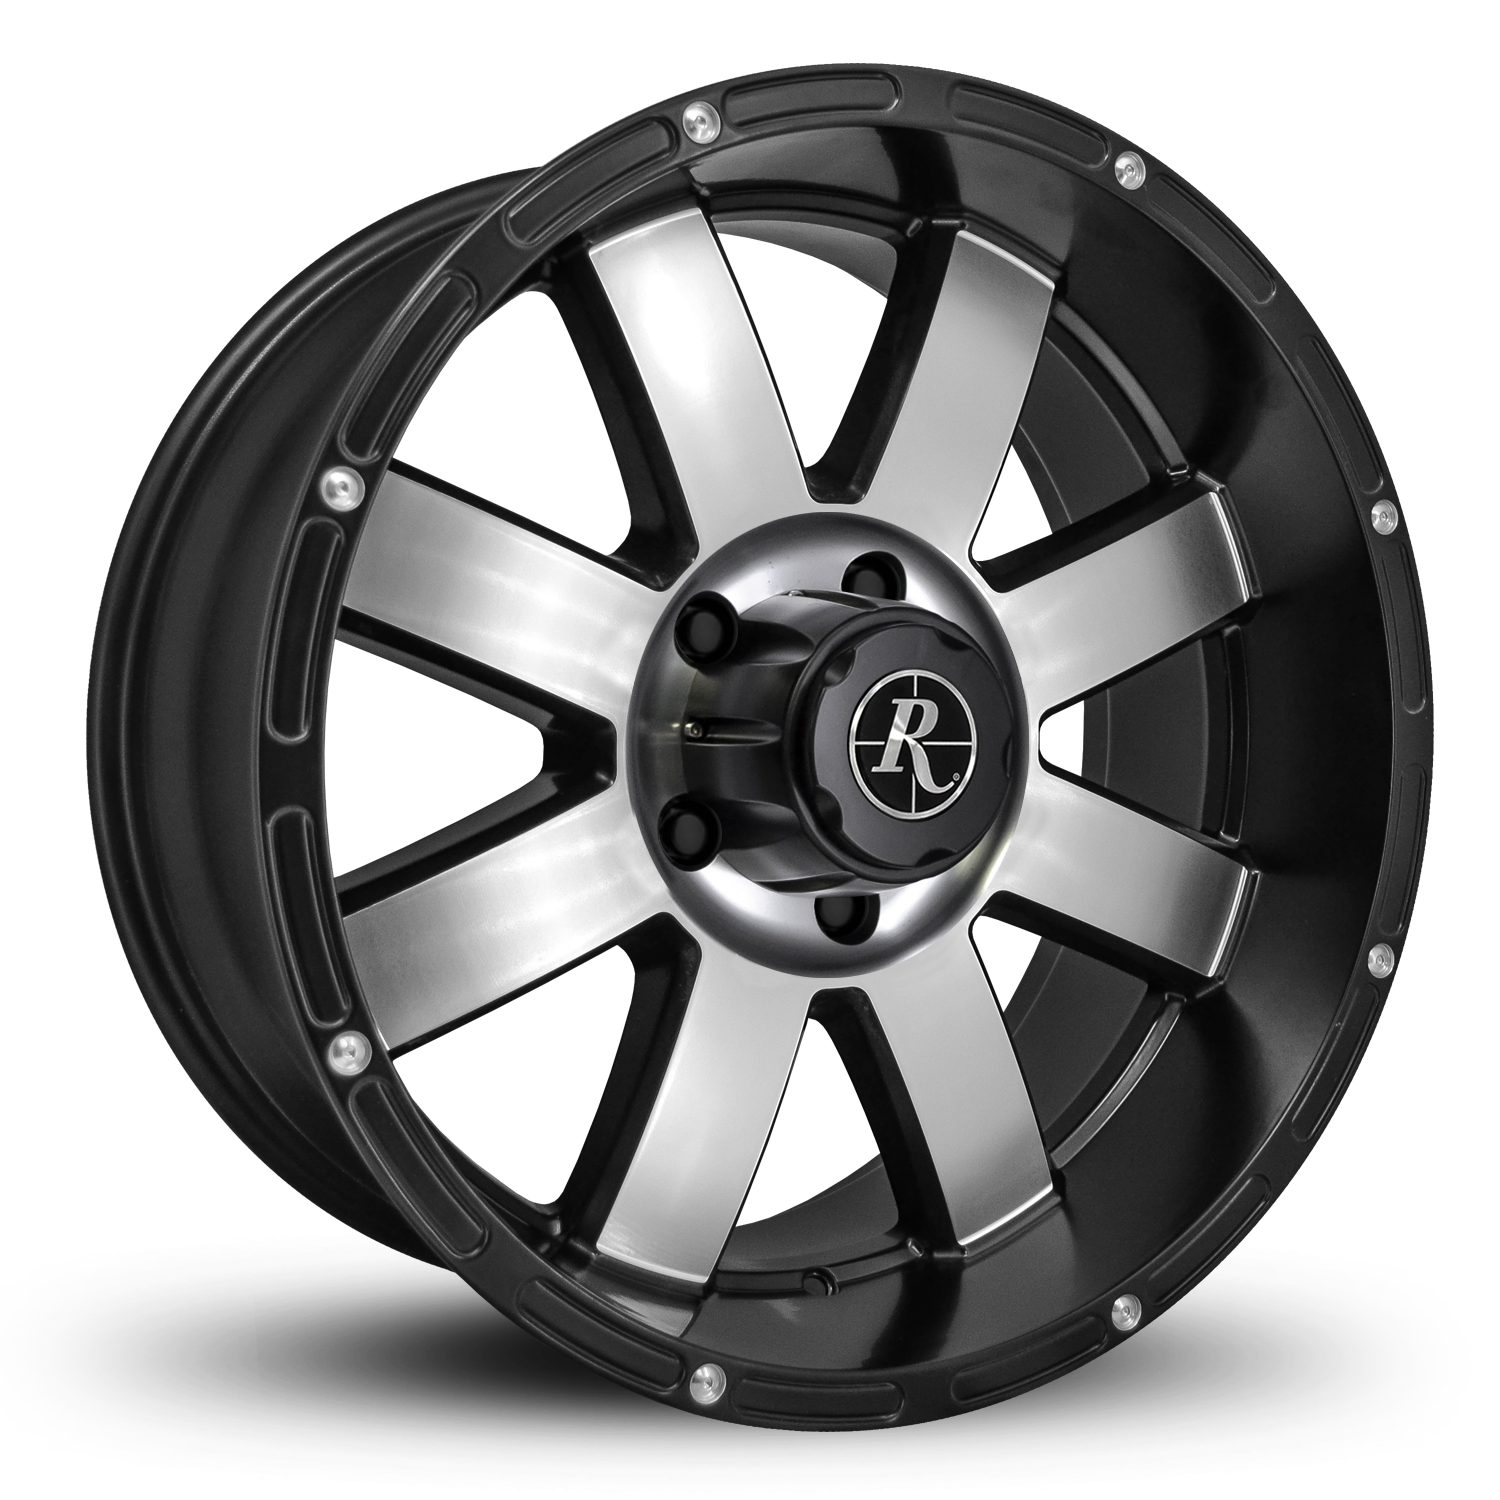 Buy Replacement Center Caps for the Remingotn 8-Point Wheel Rims